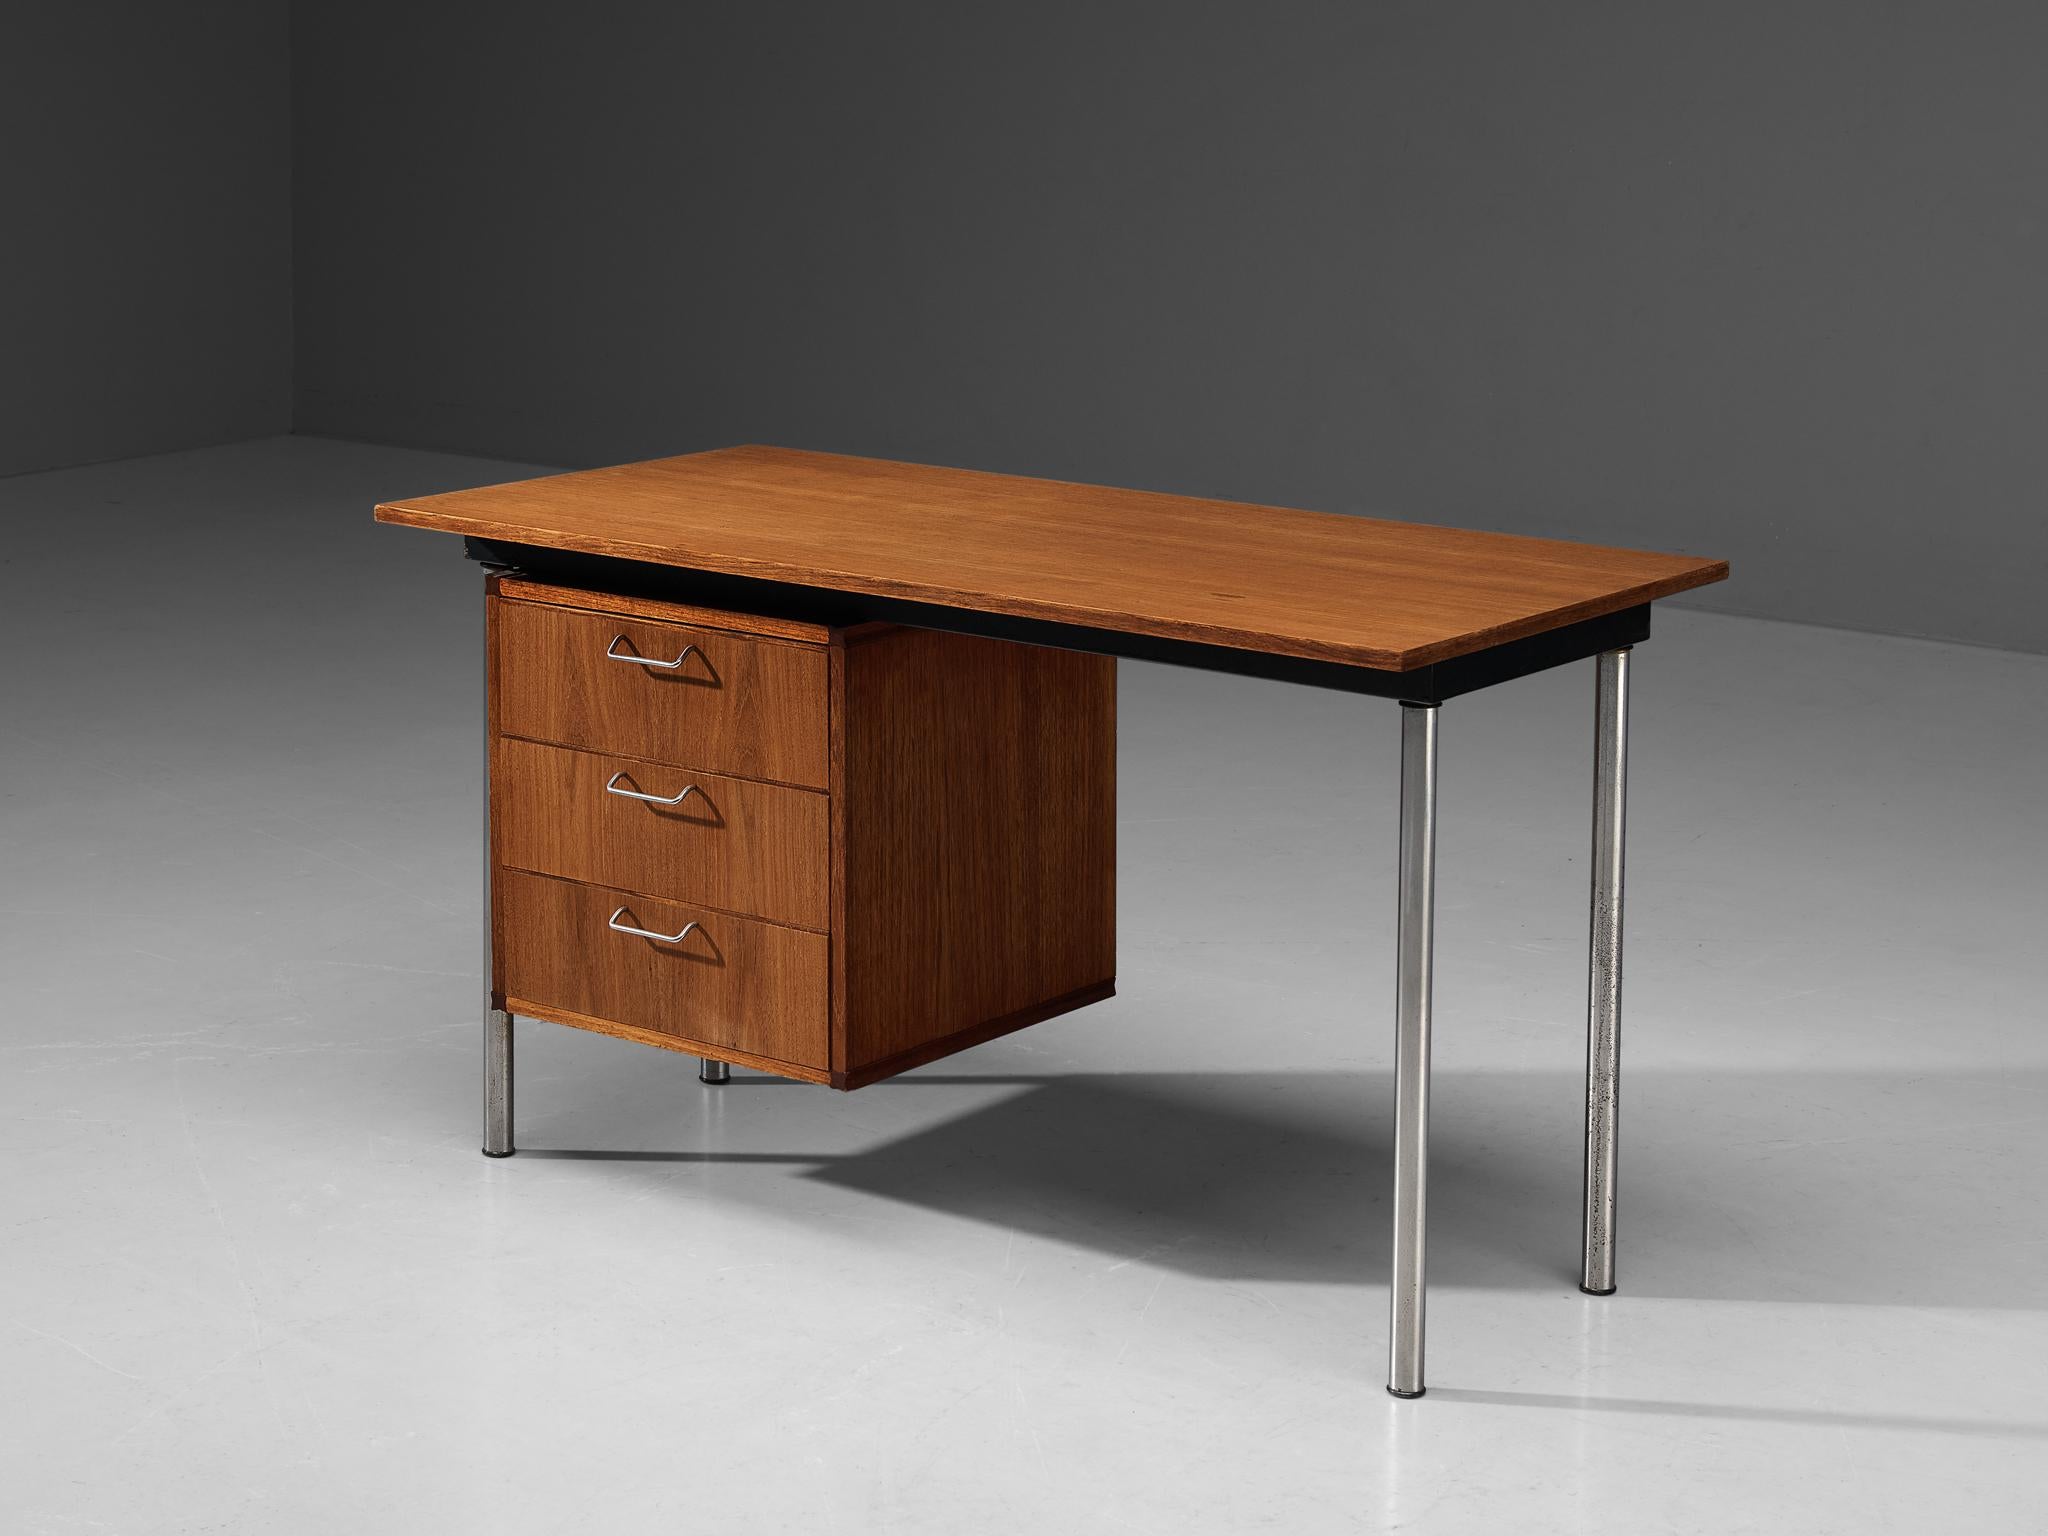 Cees Braakman for Pastoe, desk, teak, brushed metal, The Netherlands, 1950s.

Modest designed desk by Dutch designer Cees Braakman for Pastoe. The table top and drawer compartment are executed in teak. Curved plywood is used to furnish the inner